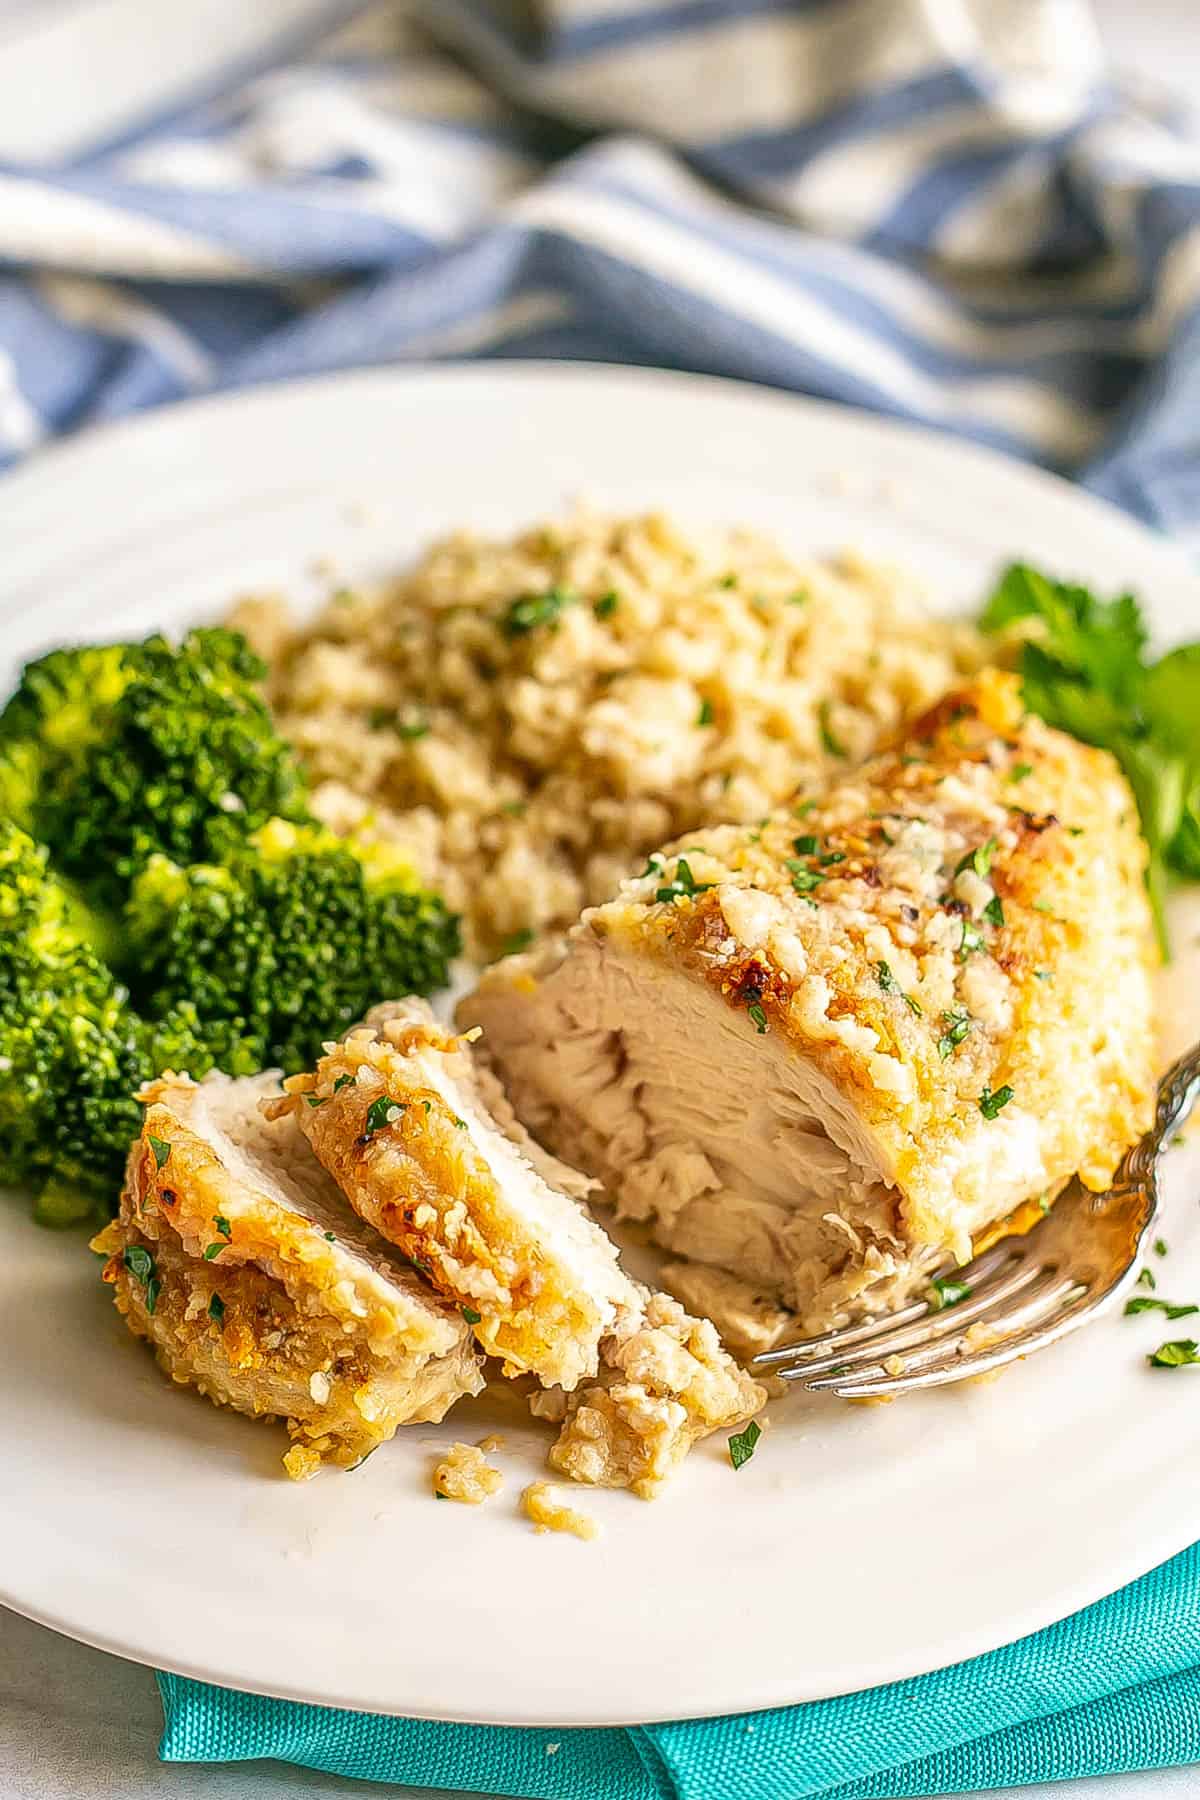 A sliced, breaded cheesy chicken breast served on a white dinner plate with rice and broccoli.